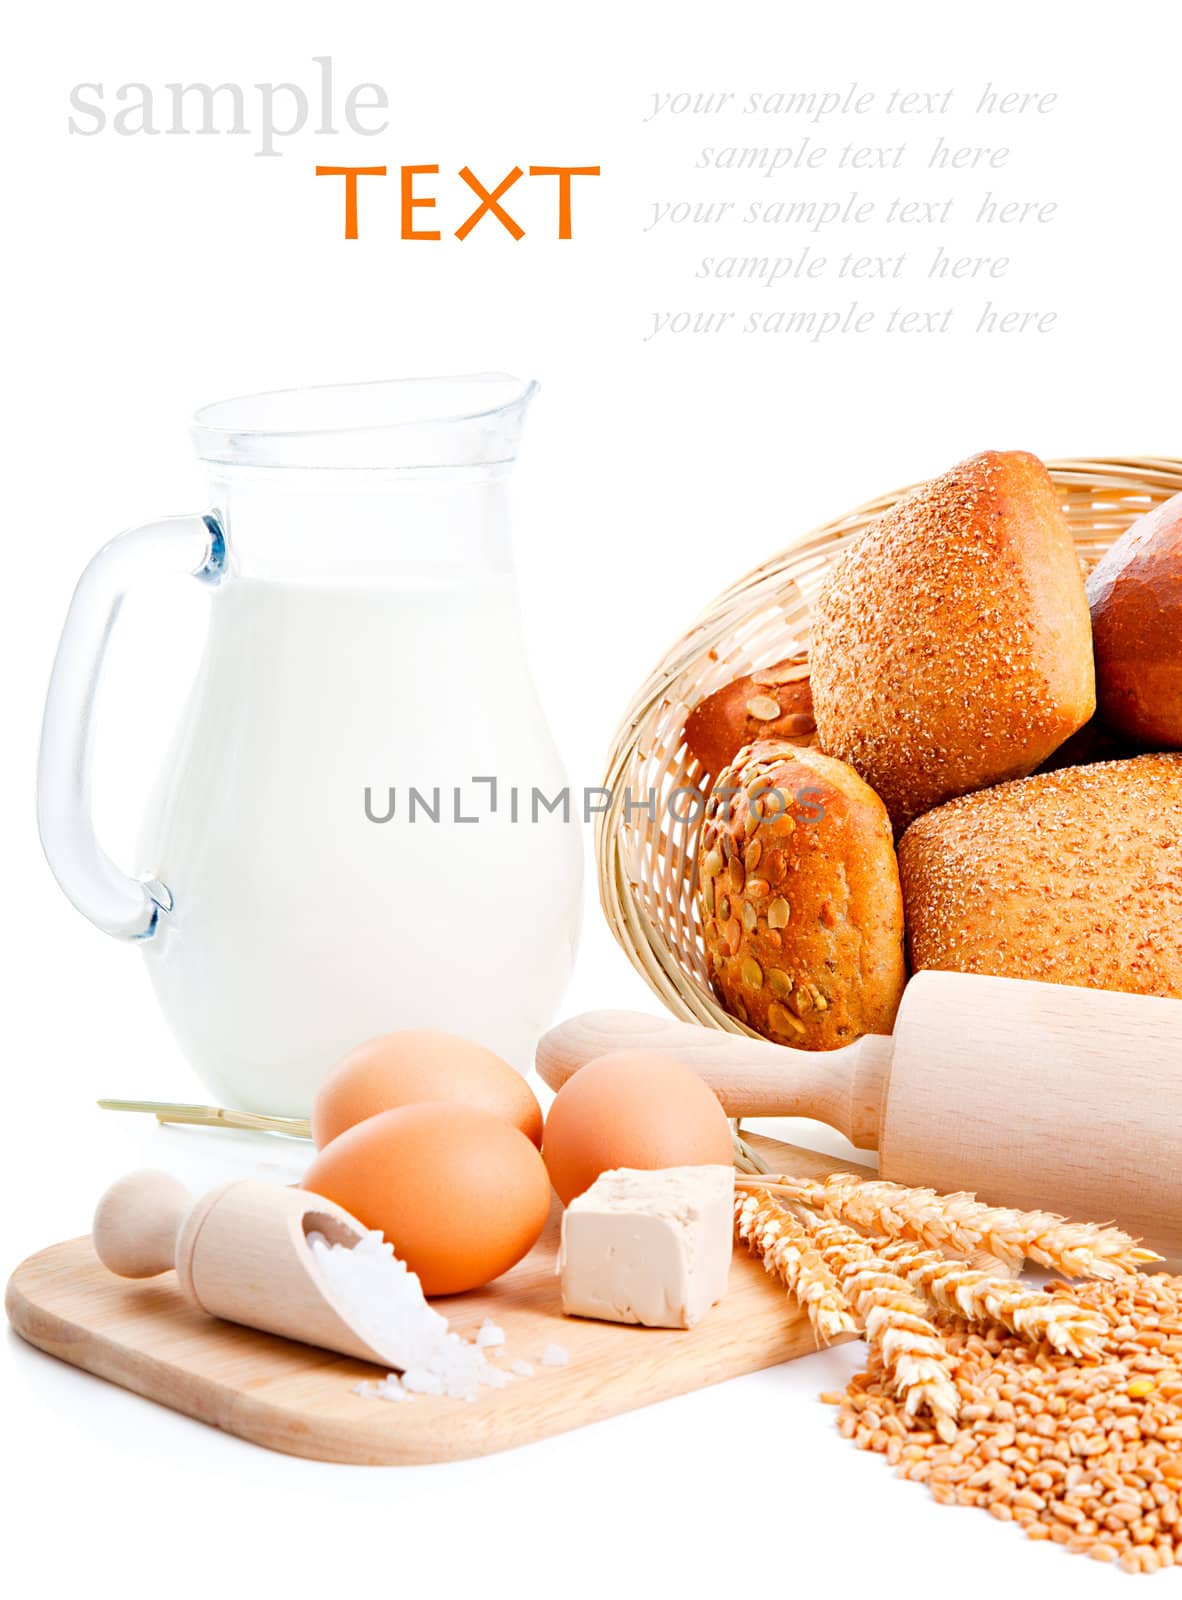 ingredients for homemade bread, isolated on a white background